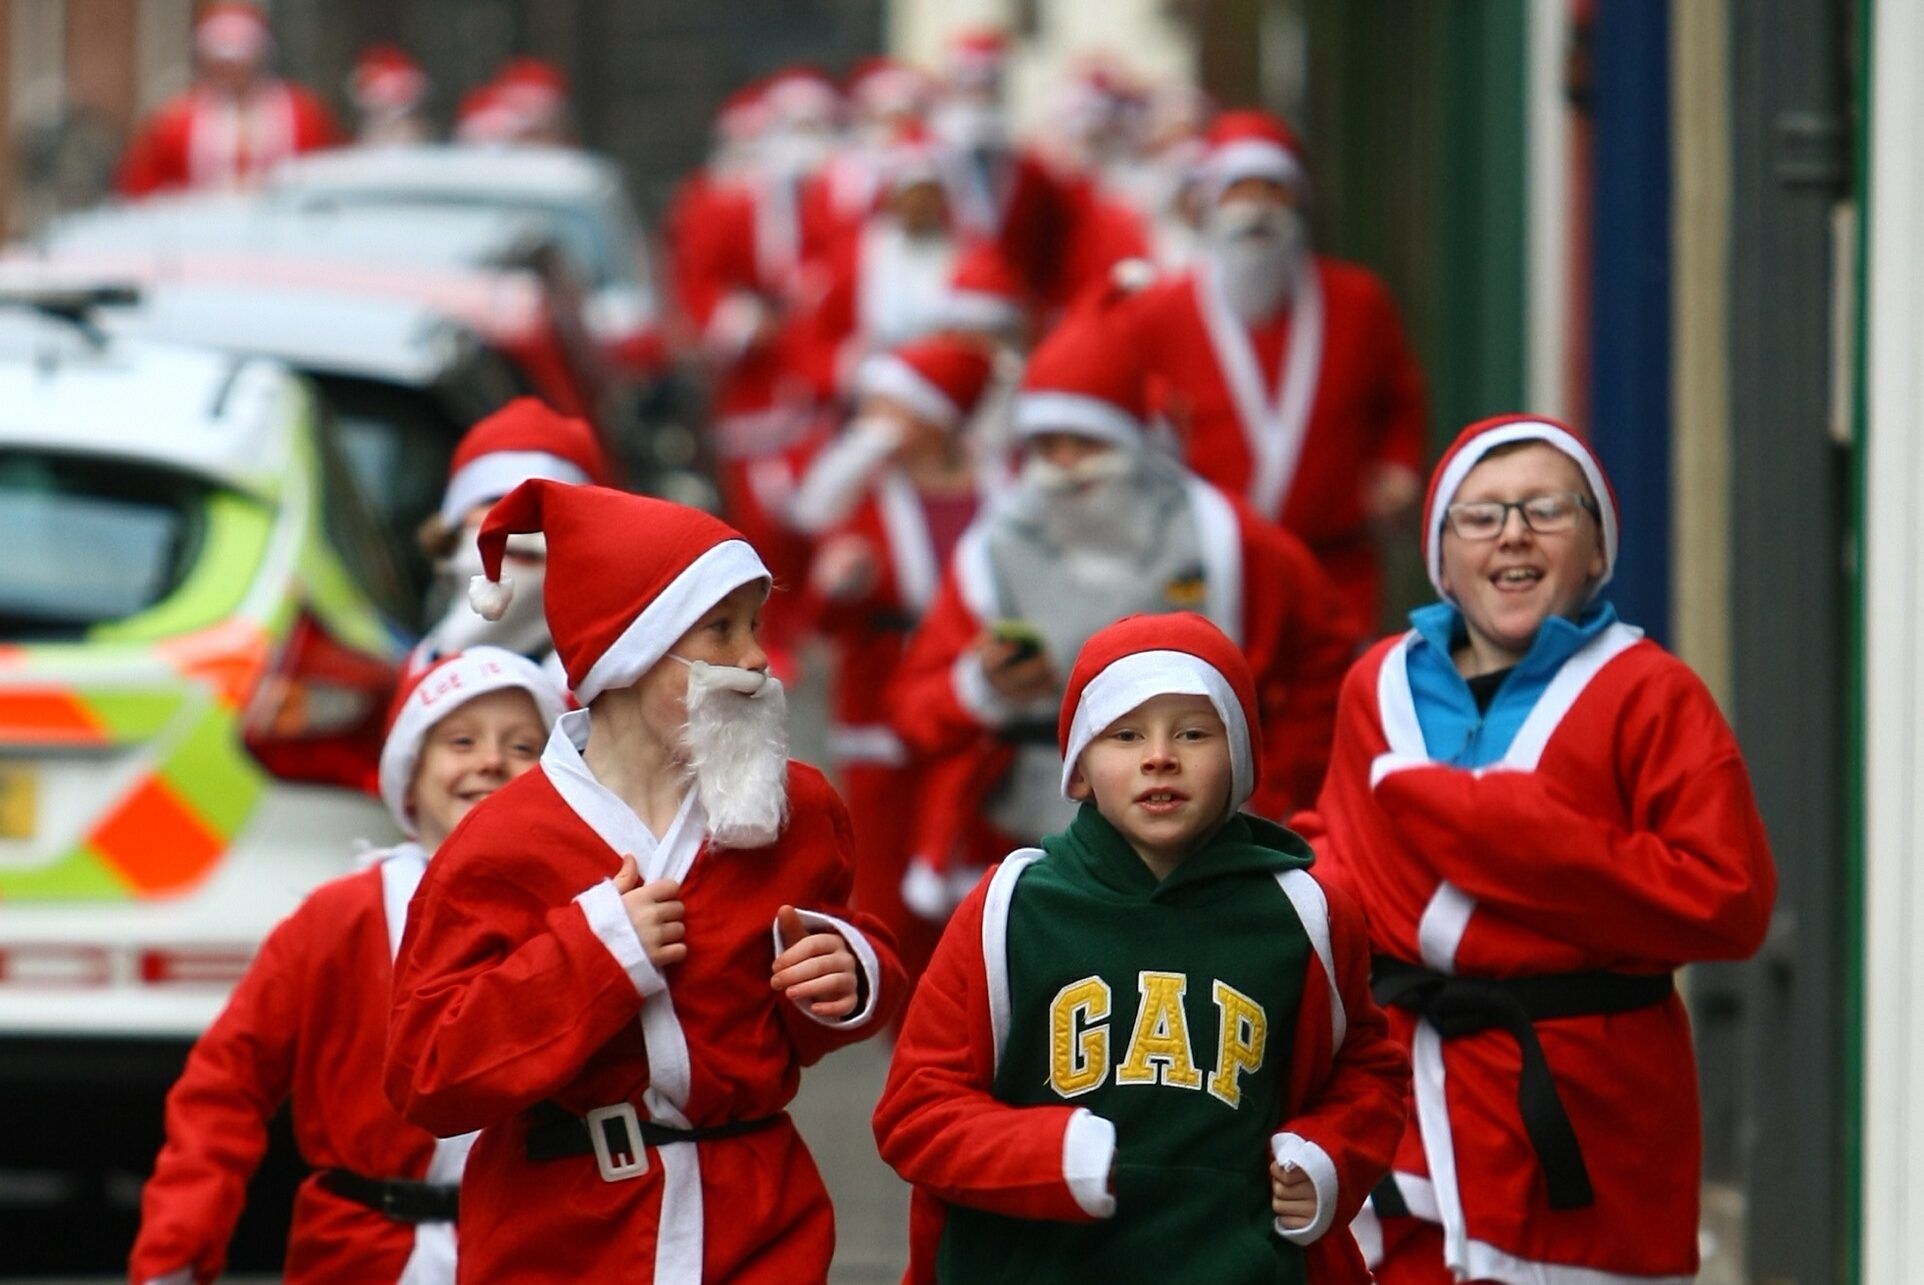 The Santa vanguard pounds its way down the High Street